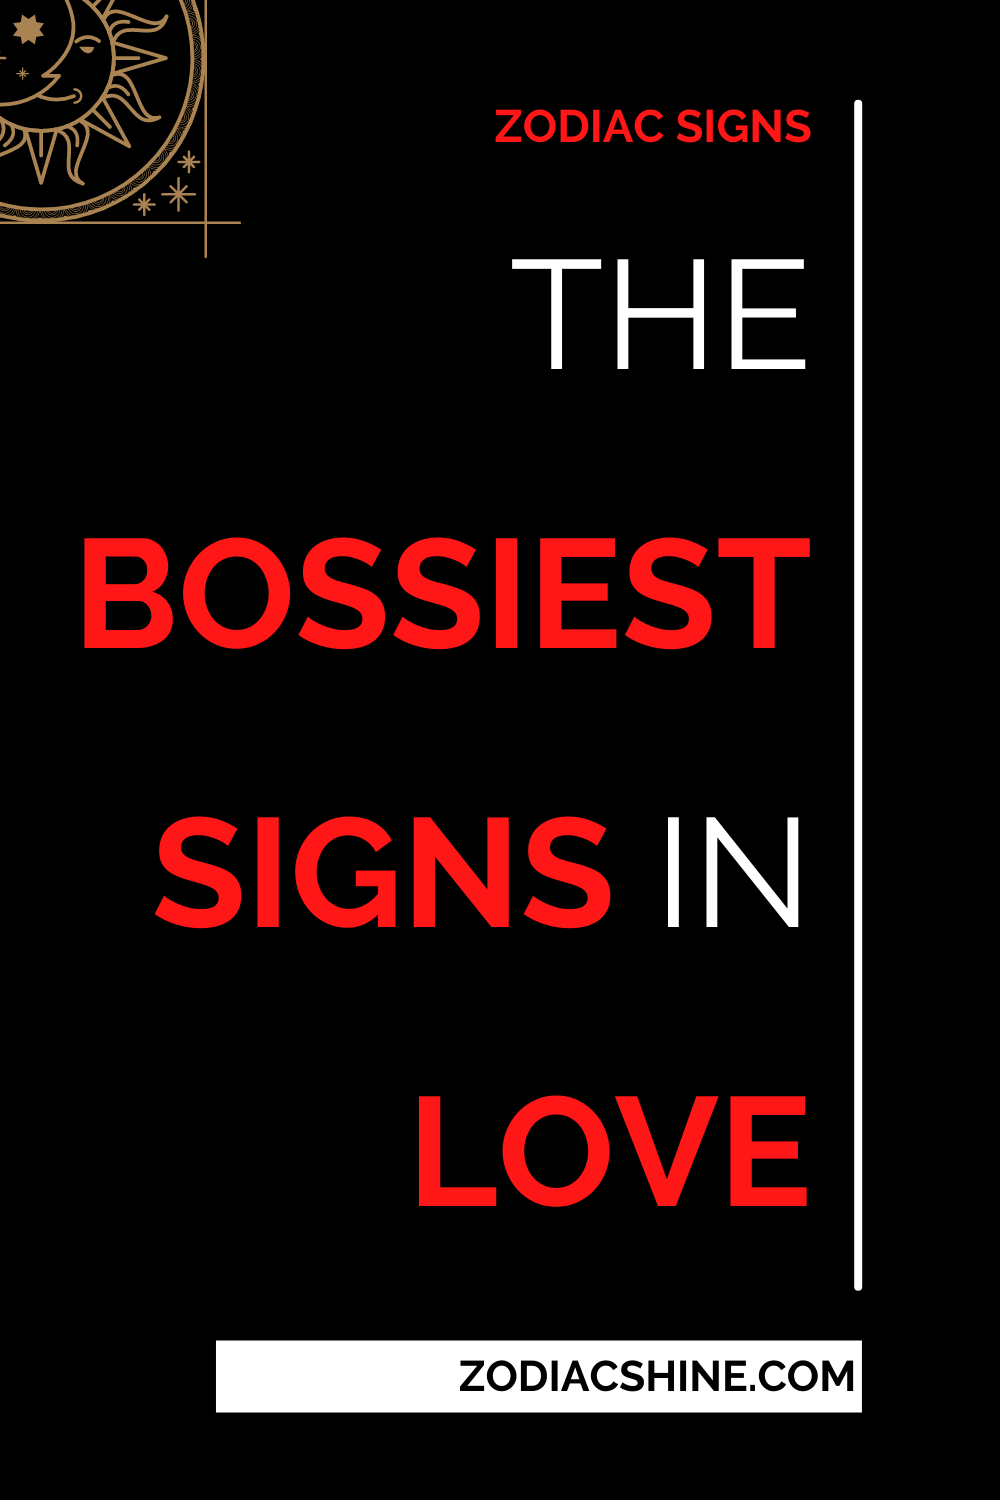 The Bossiest Signs In Love